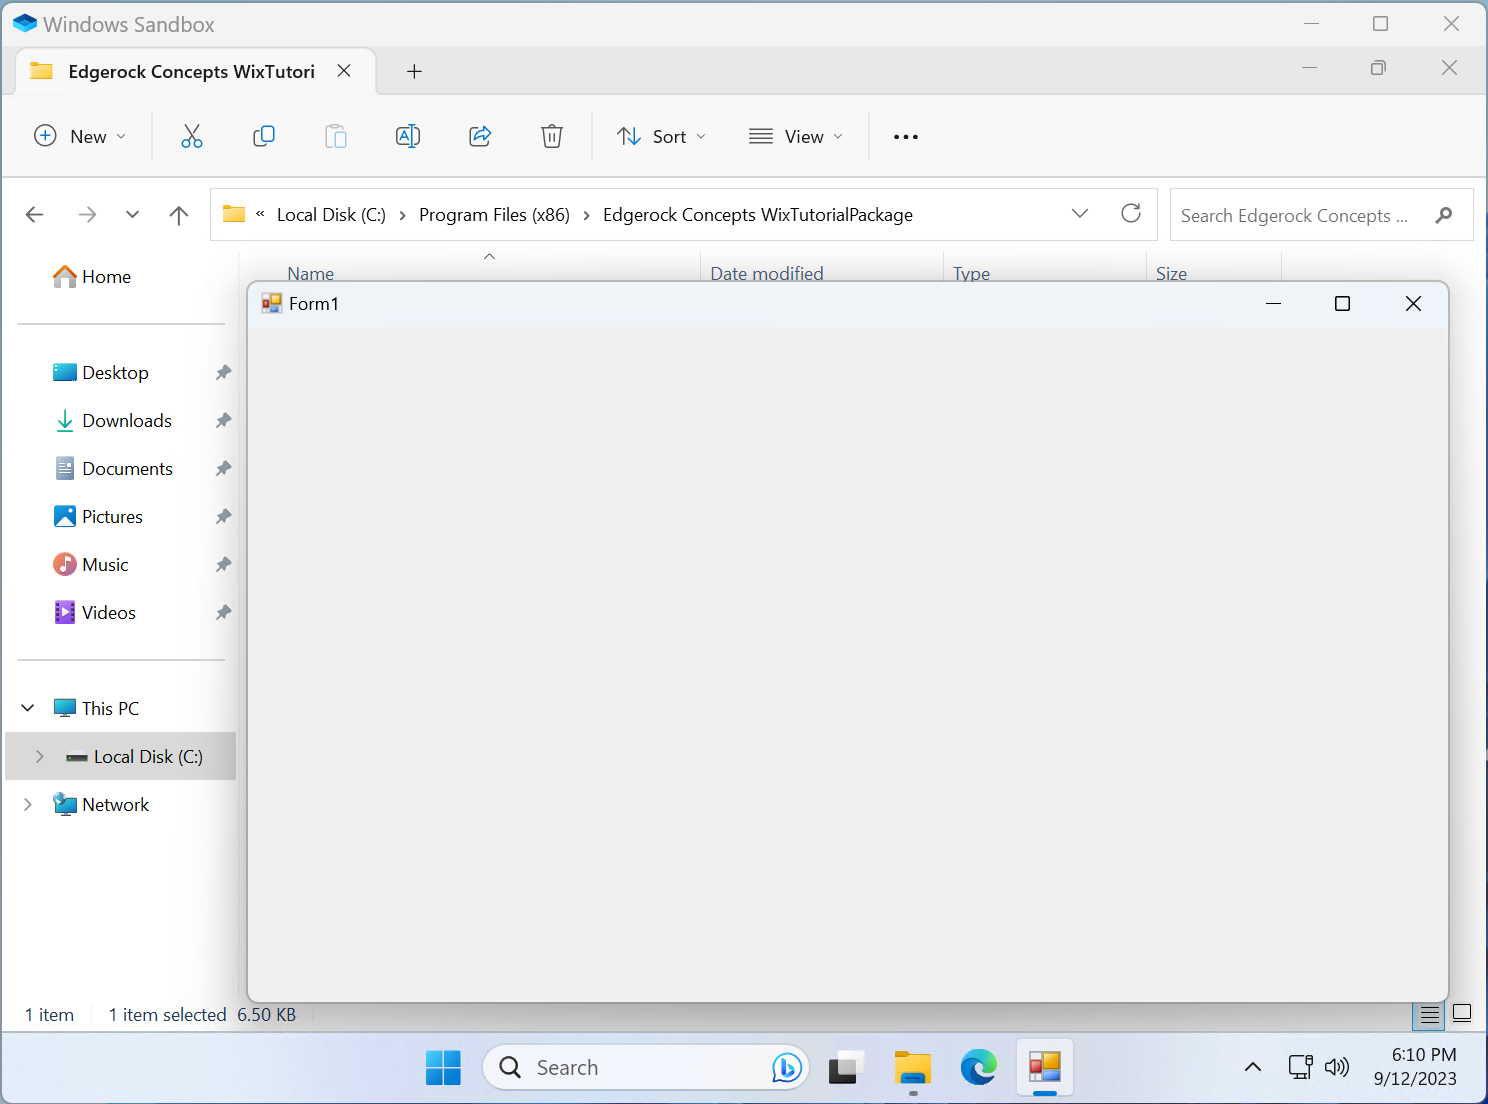 A screen shot of Windows Sandbox showing a successfully installed placeholder app